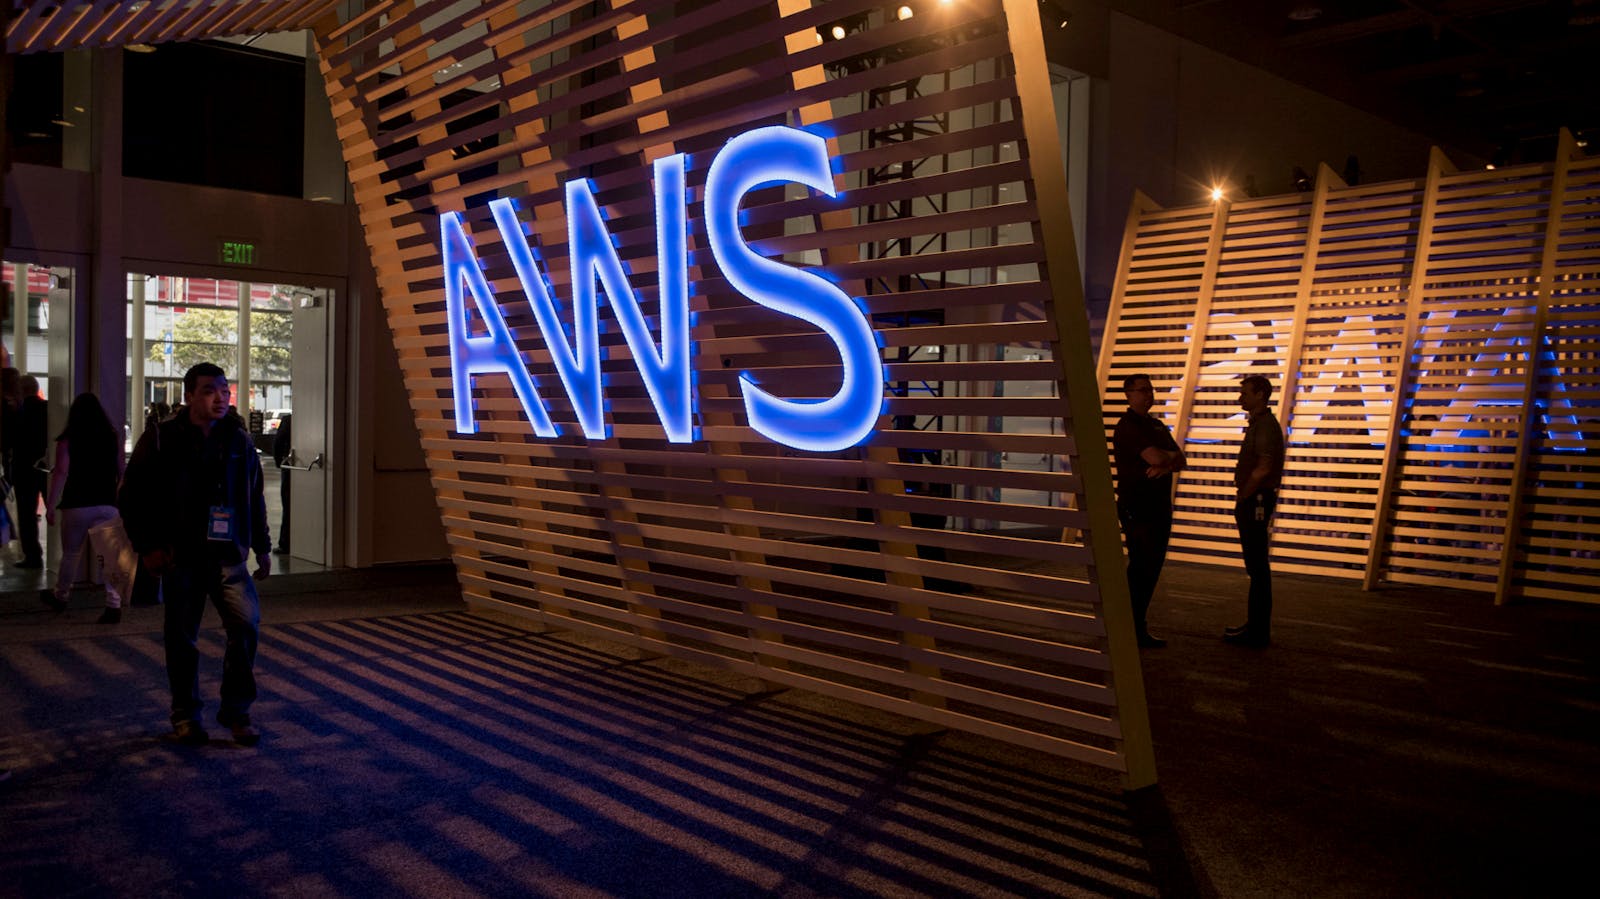 An Amazon Web Services event in San Francisco last year. Photo by Bloomberg